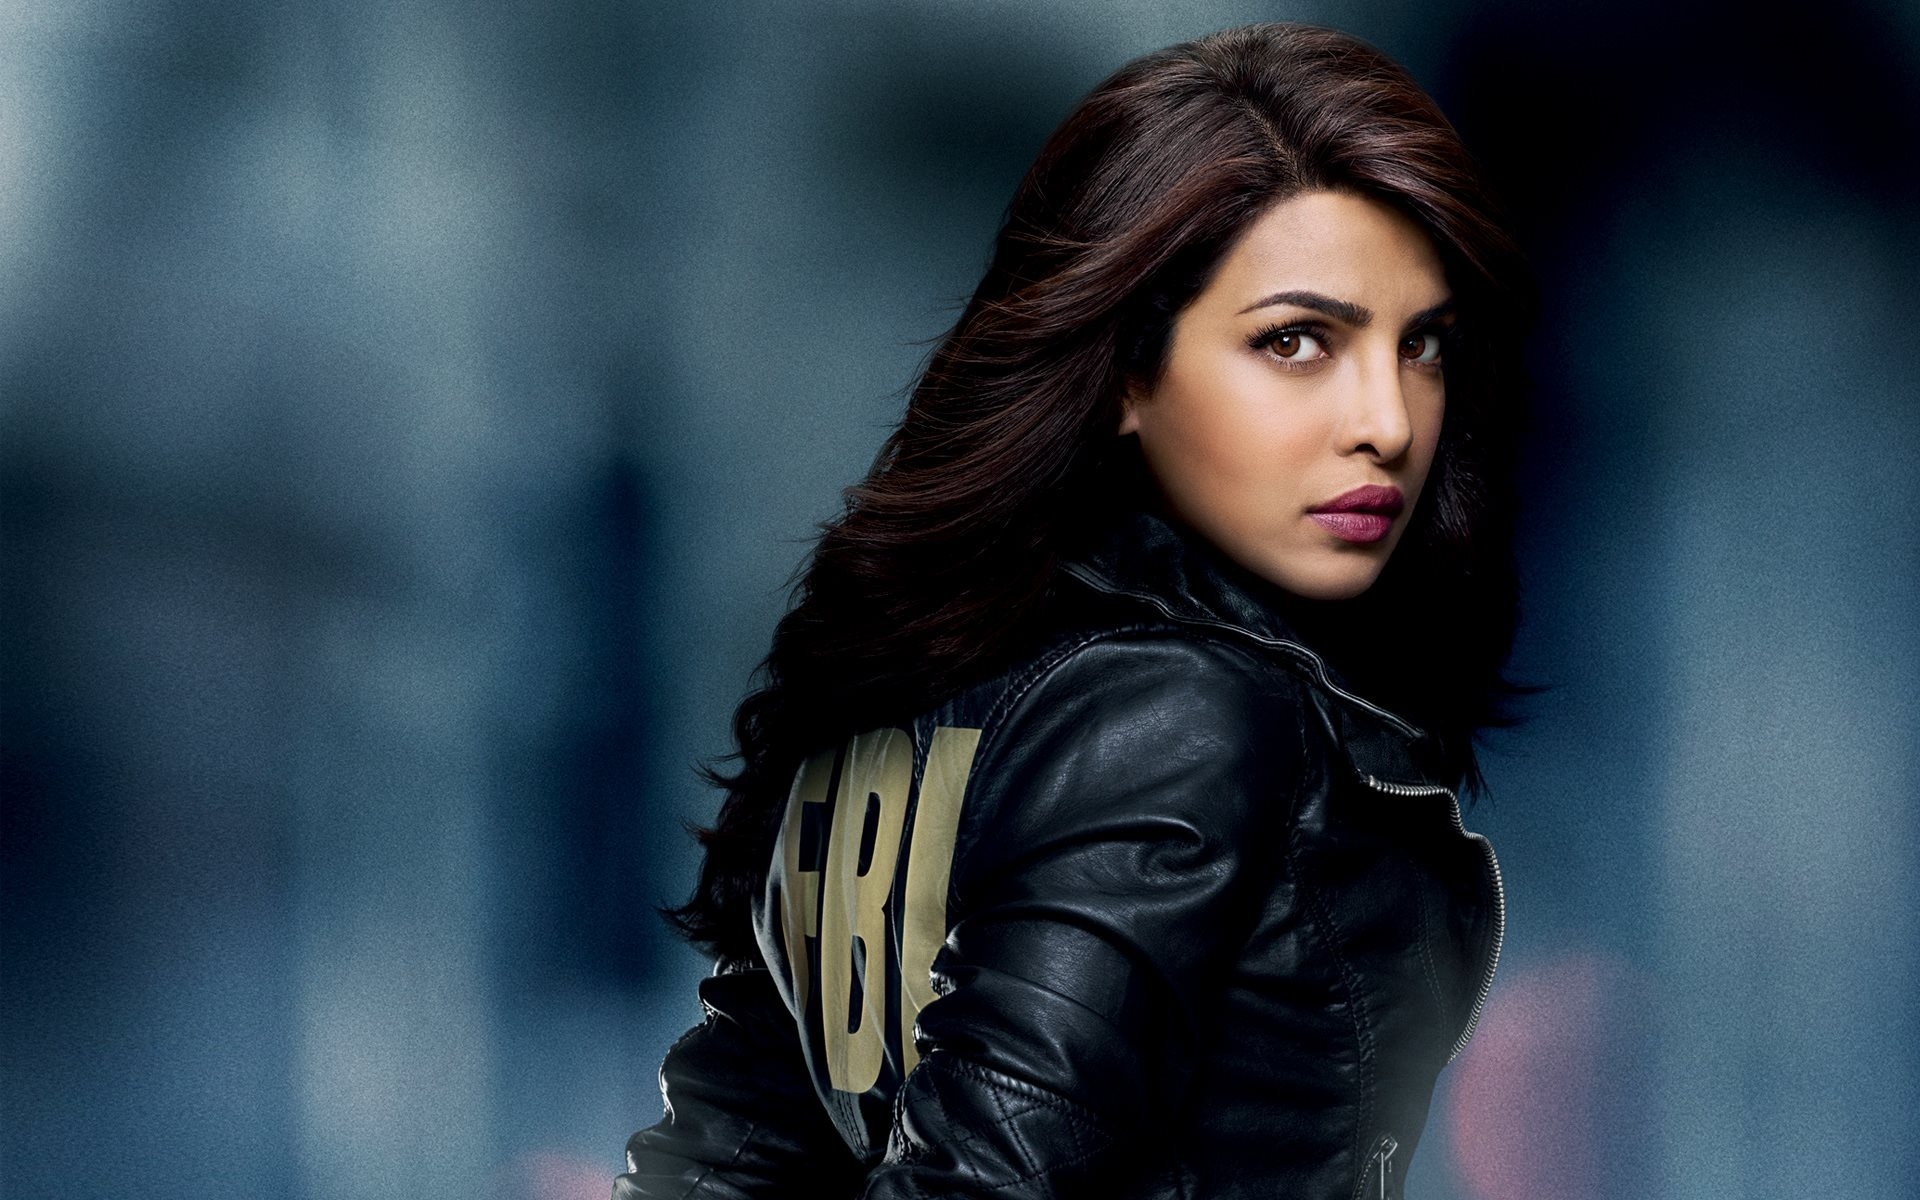 television channel abc, quantico, priyanka chopra, academy quantico, cadet, indian, miss world in 2000, fbi, series, singer, suspicion of terrorism, detained, oriental, arrested, special agent, actress, tv series, agent, jacket, brown hair, abc, miss, bro